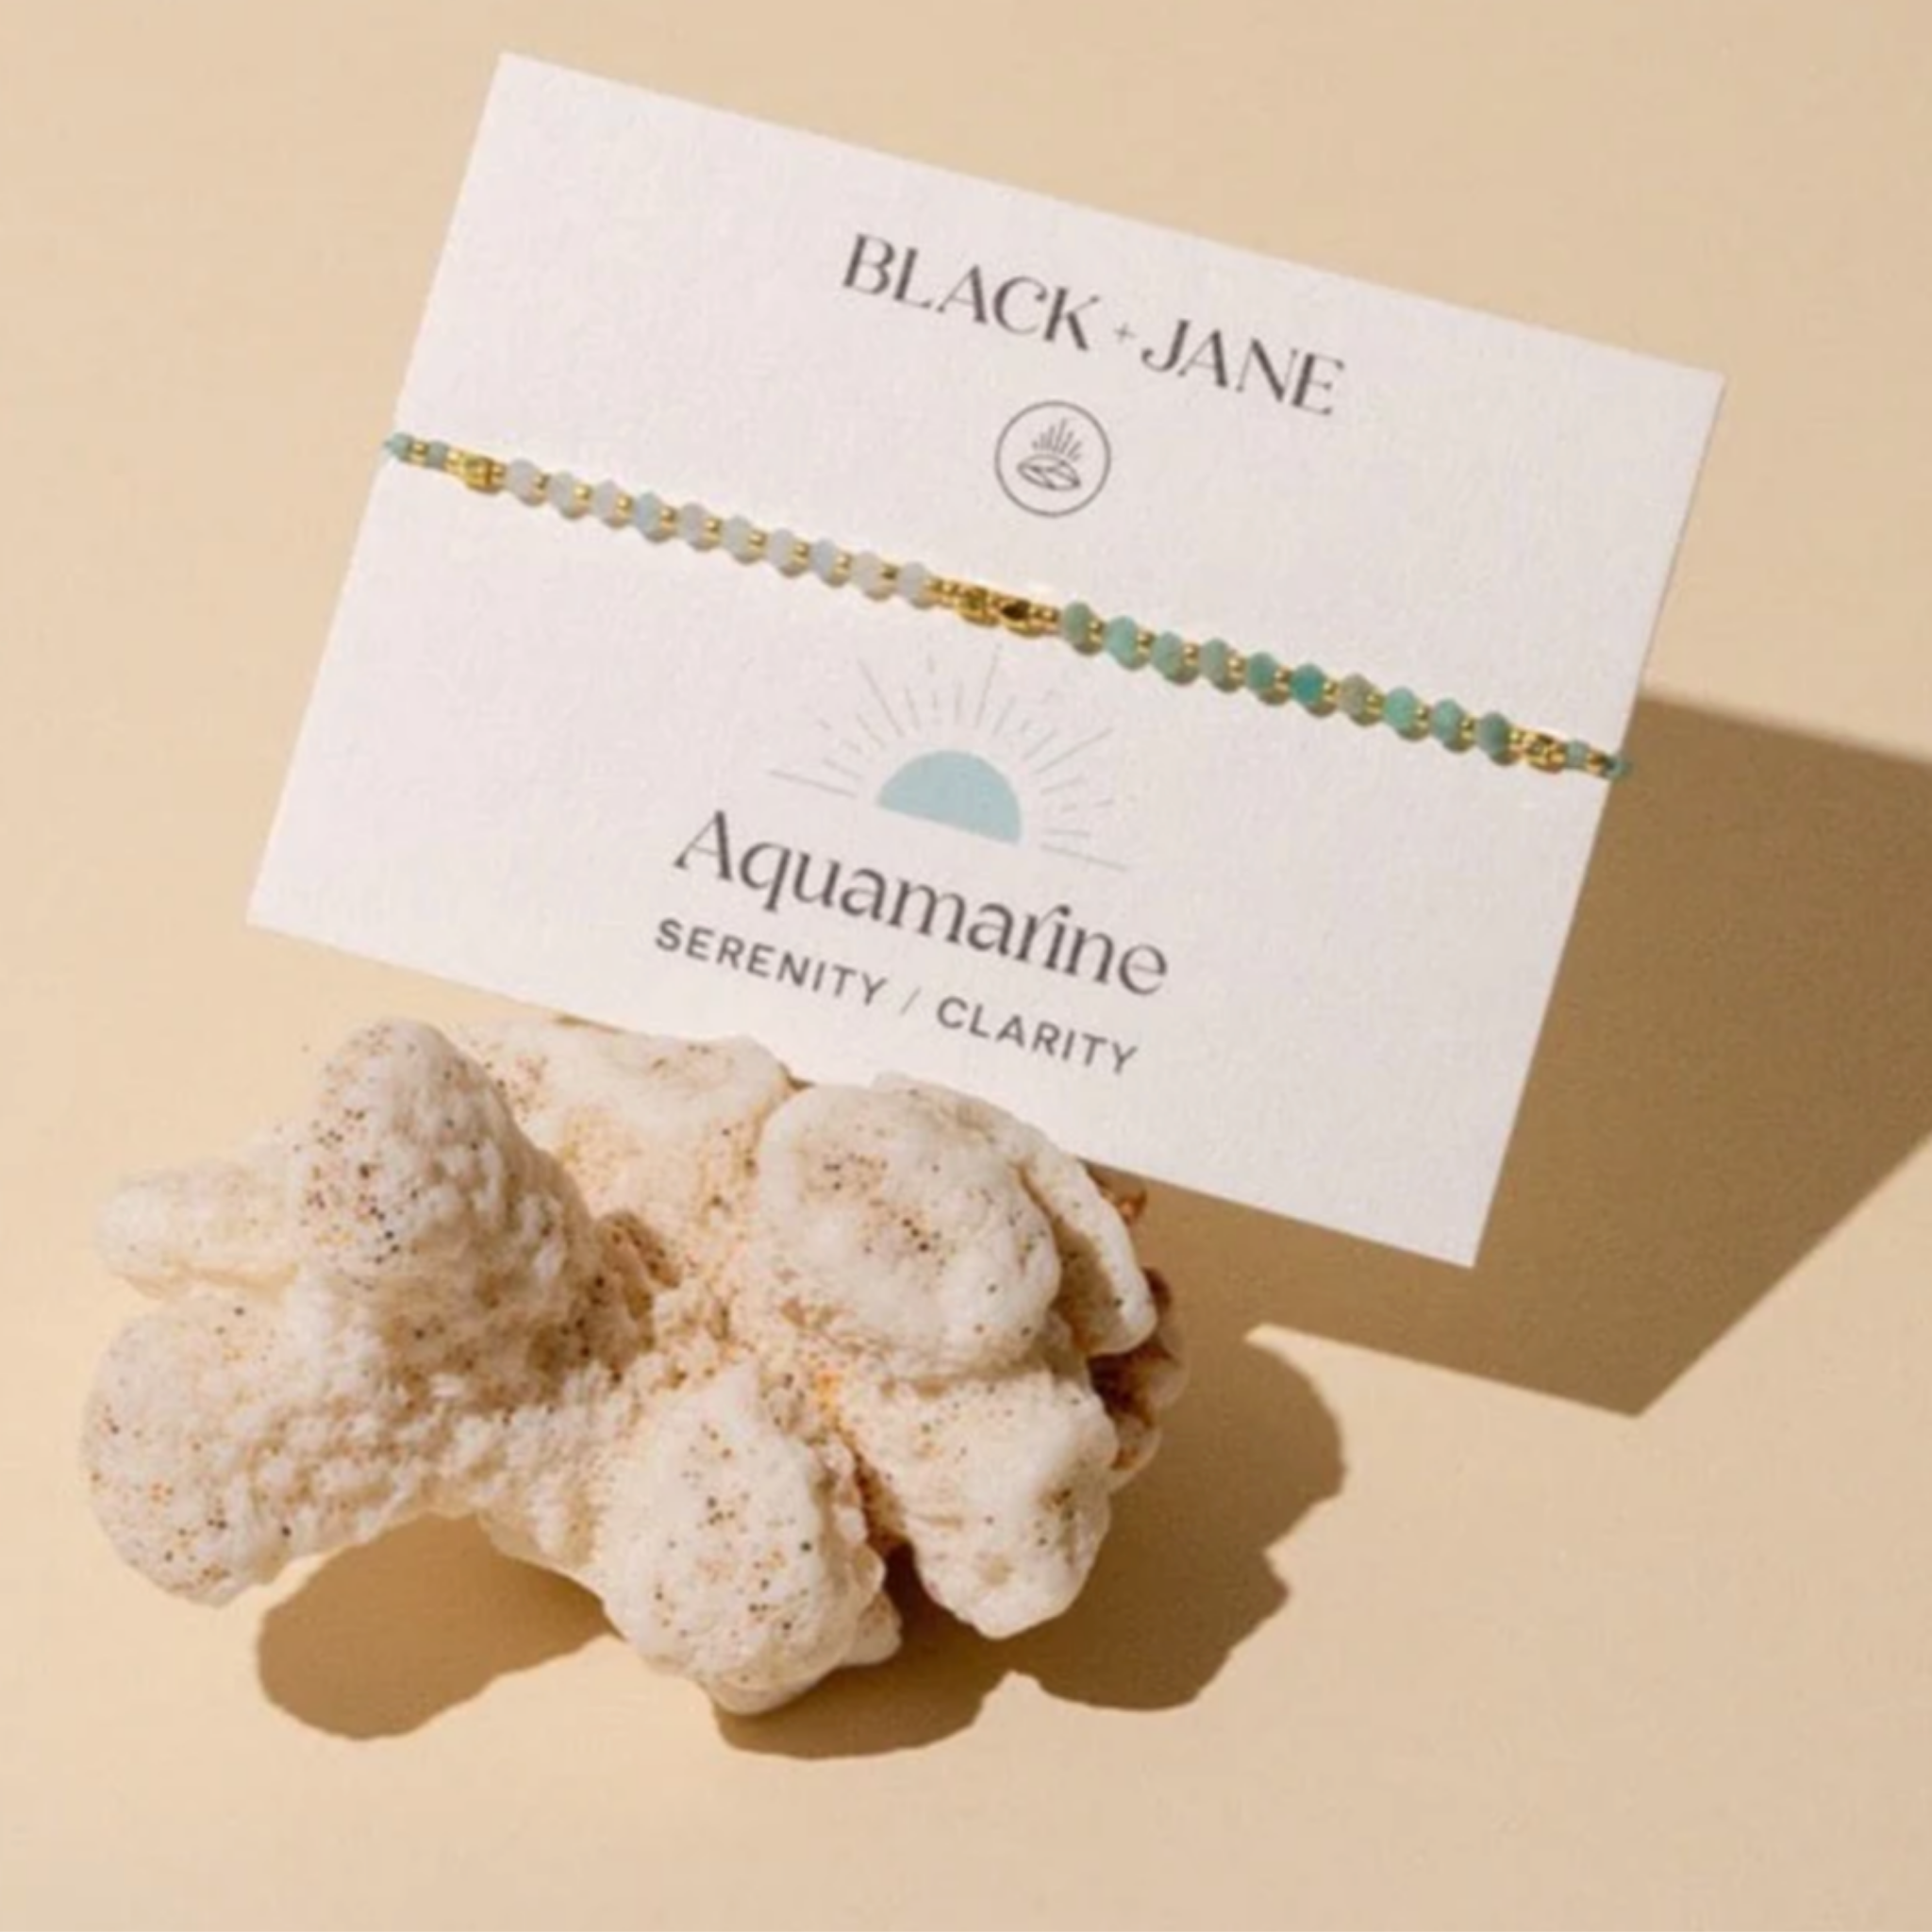 Aquamarine Bracelet: A Natural Stone That Promotes Peace, Balance, and Tranquility